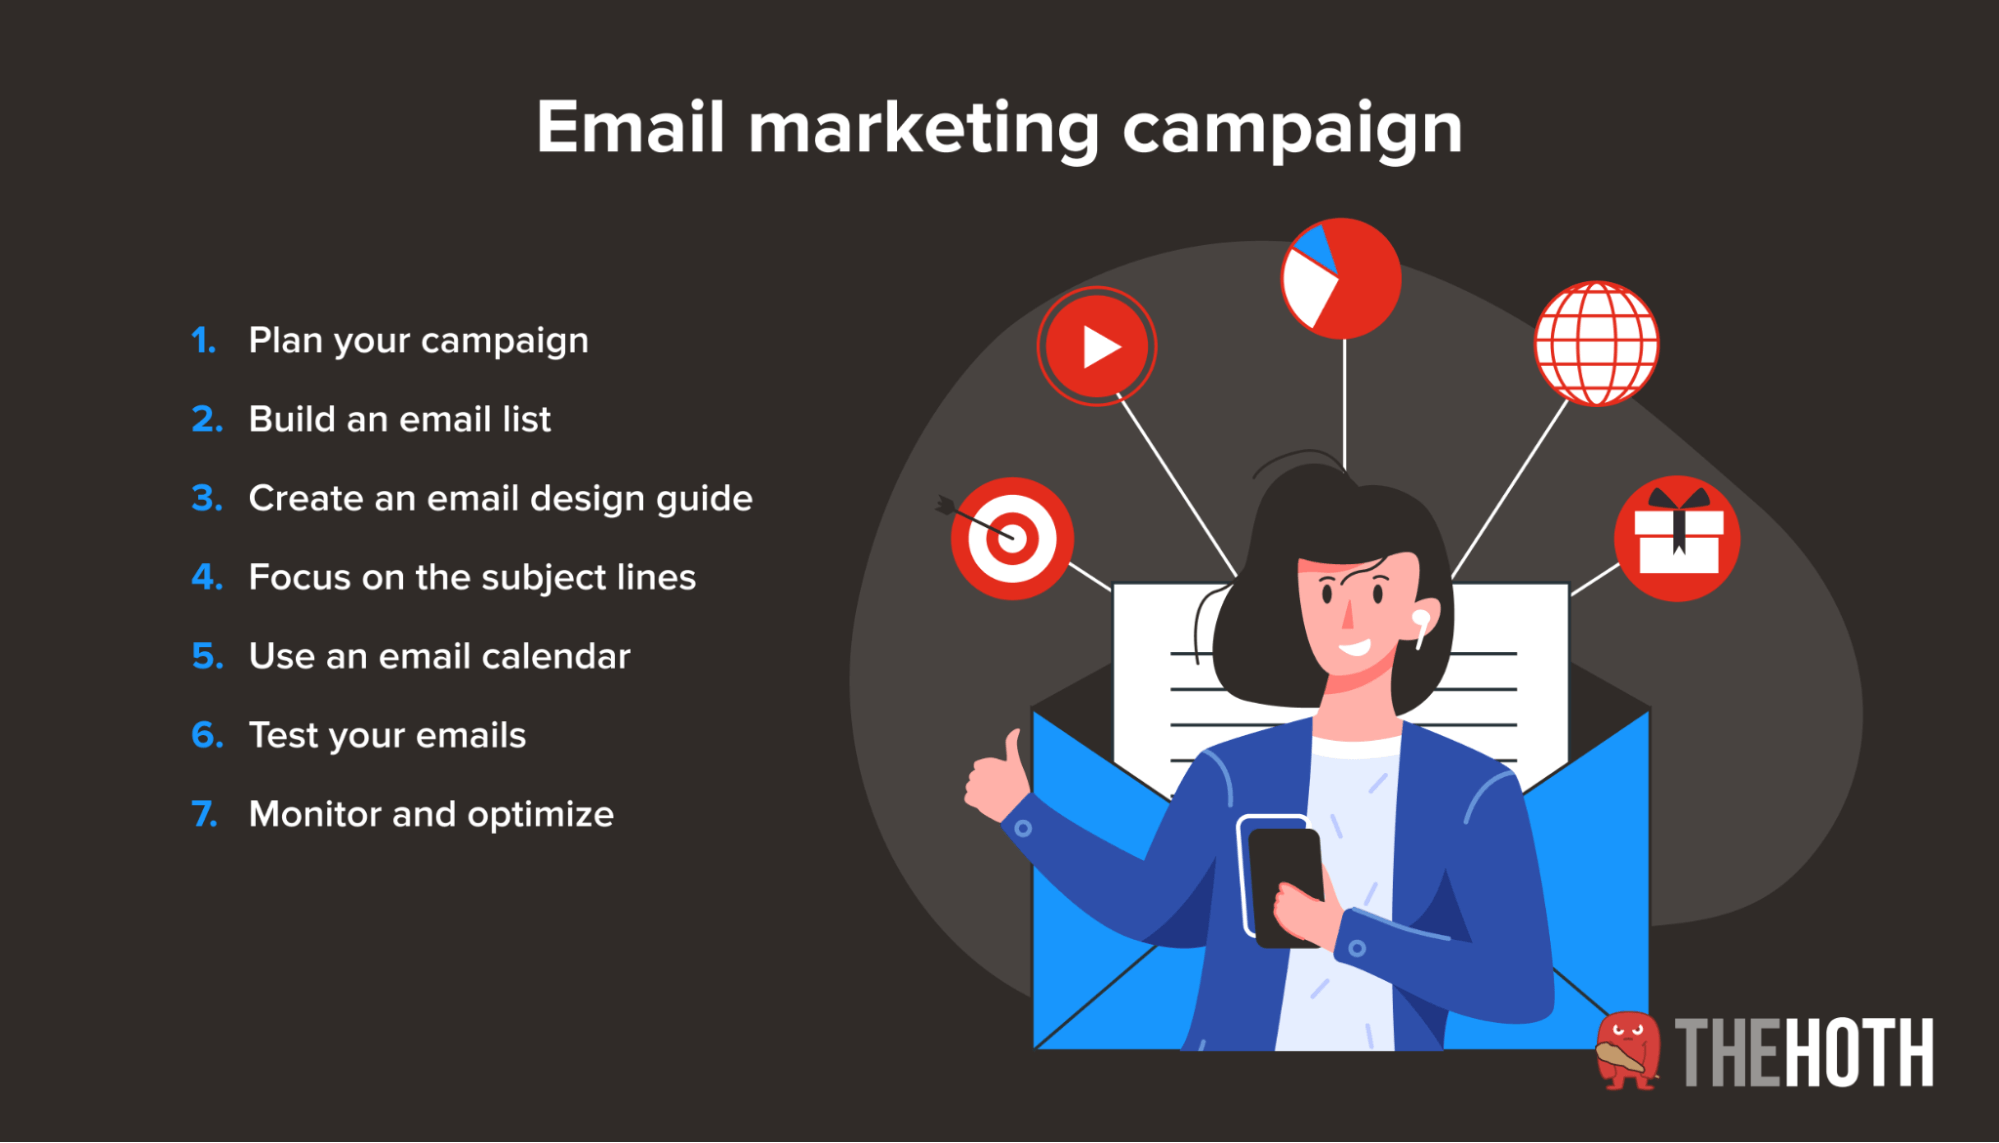 How to build your own email marketing campaign